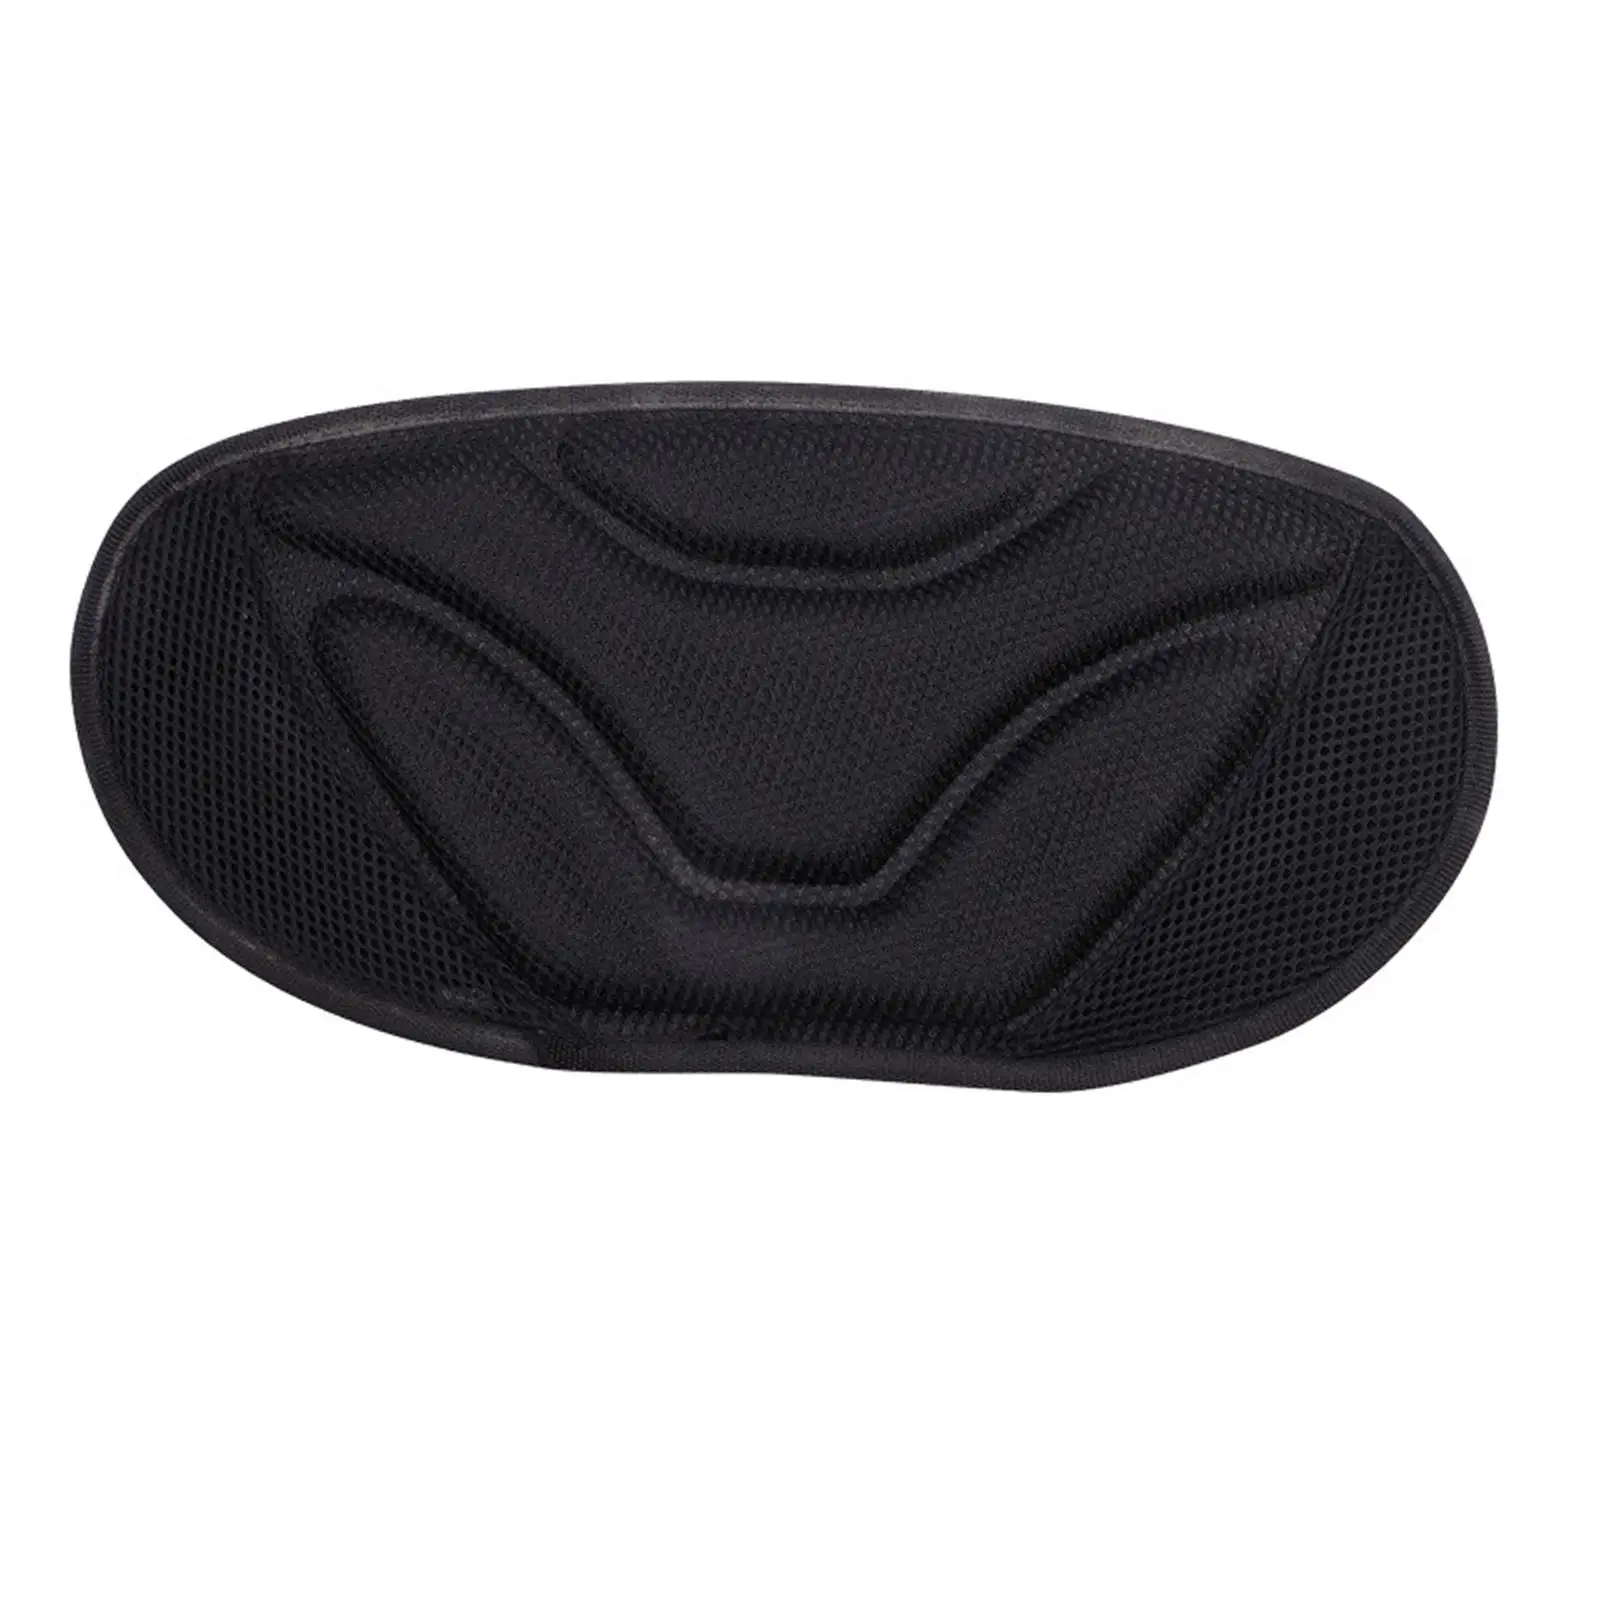 Kayak Padded Seat Soft Thicken Back Support Pad Canoe Boat Seat Boat Cushion for Canoeing Kayaking Rafting Drifting Accessories